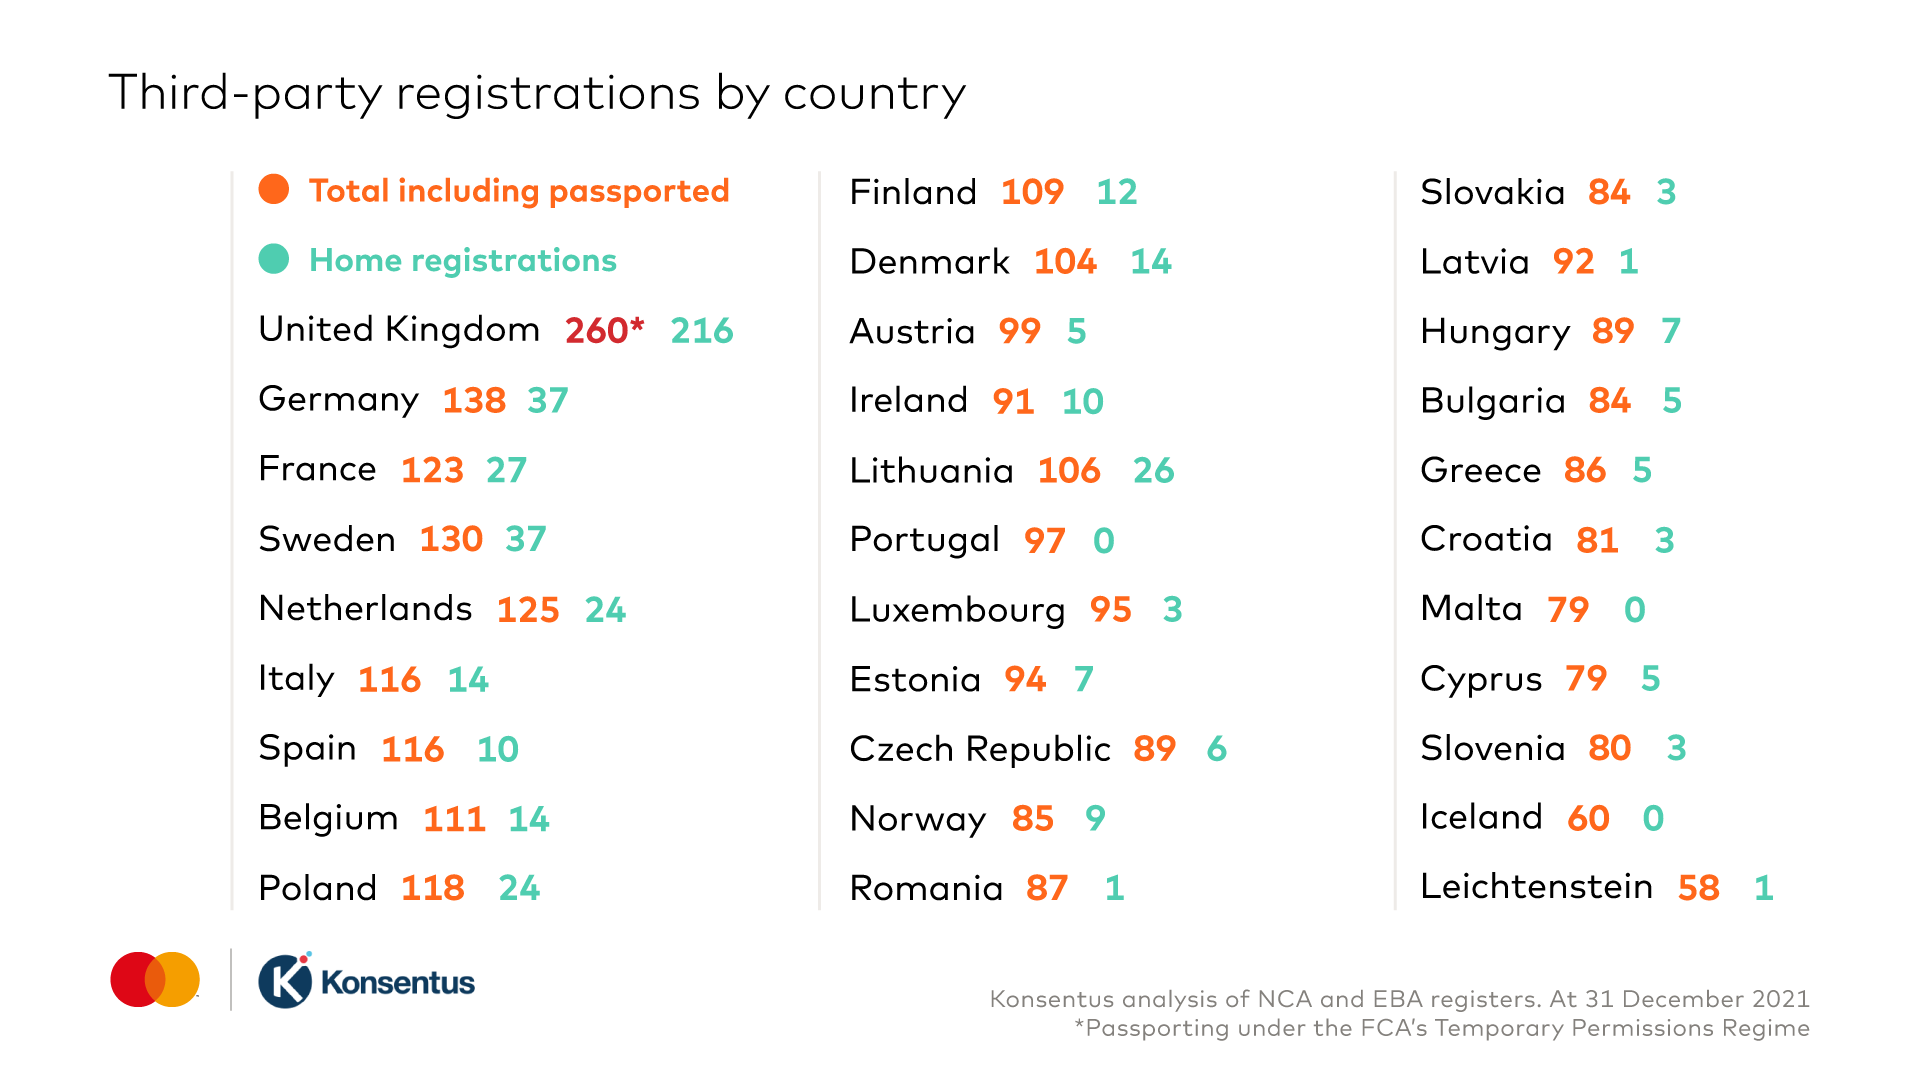 Third party registrations by country. UK 216, Germany 37, France 27 home registrations